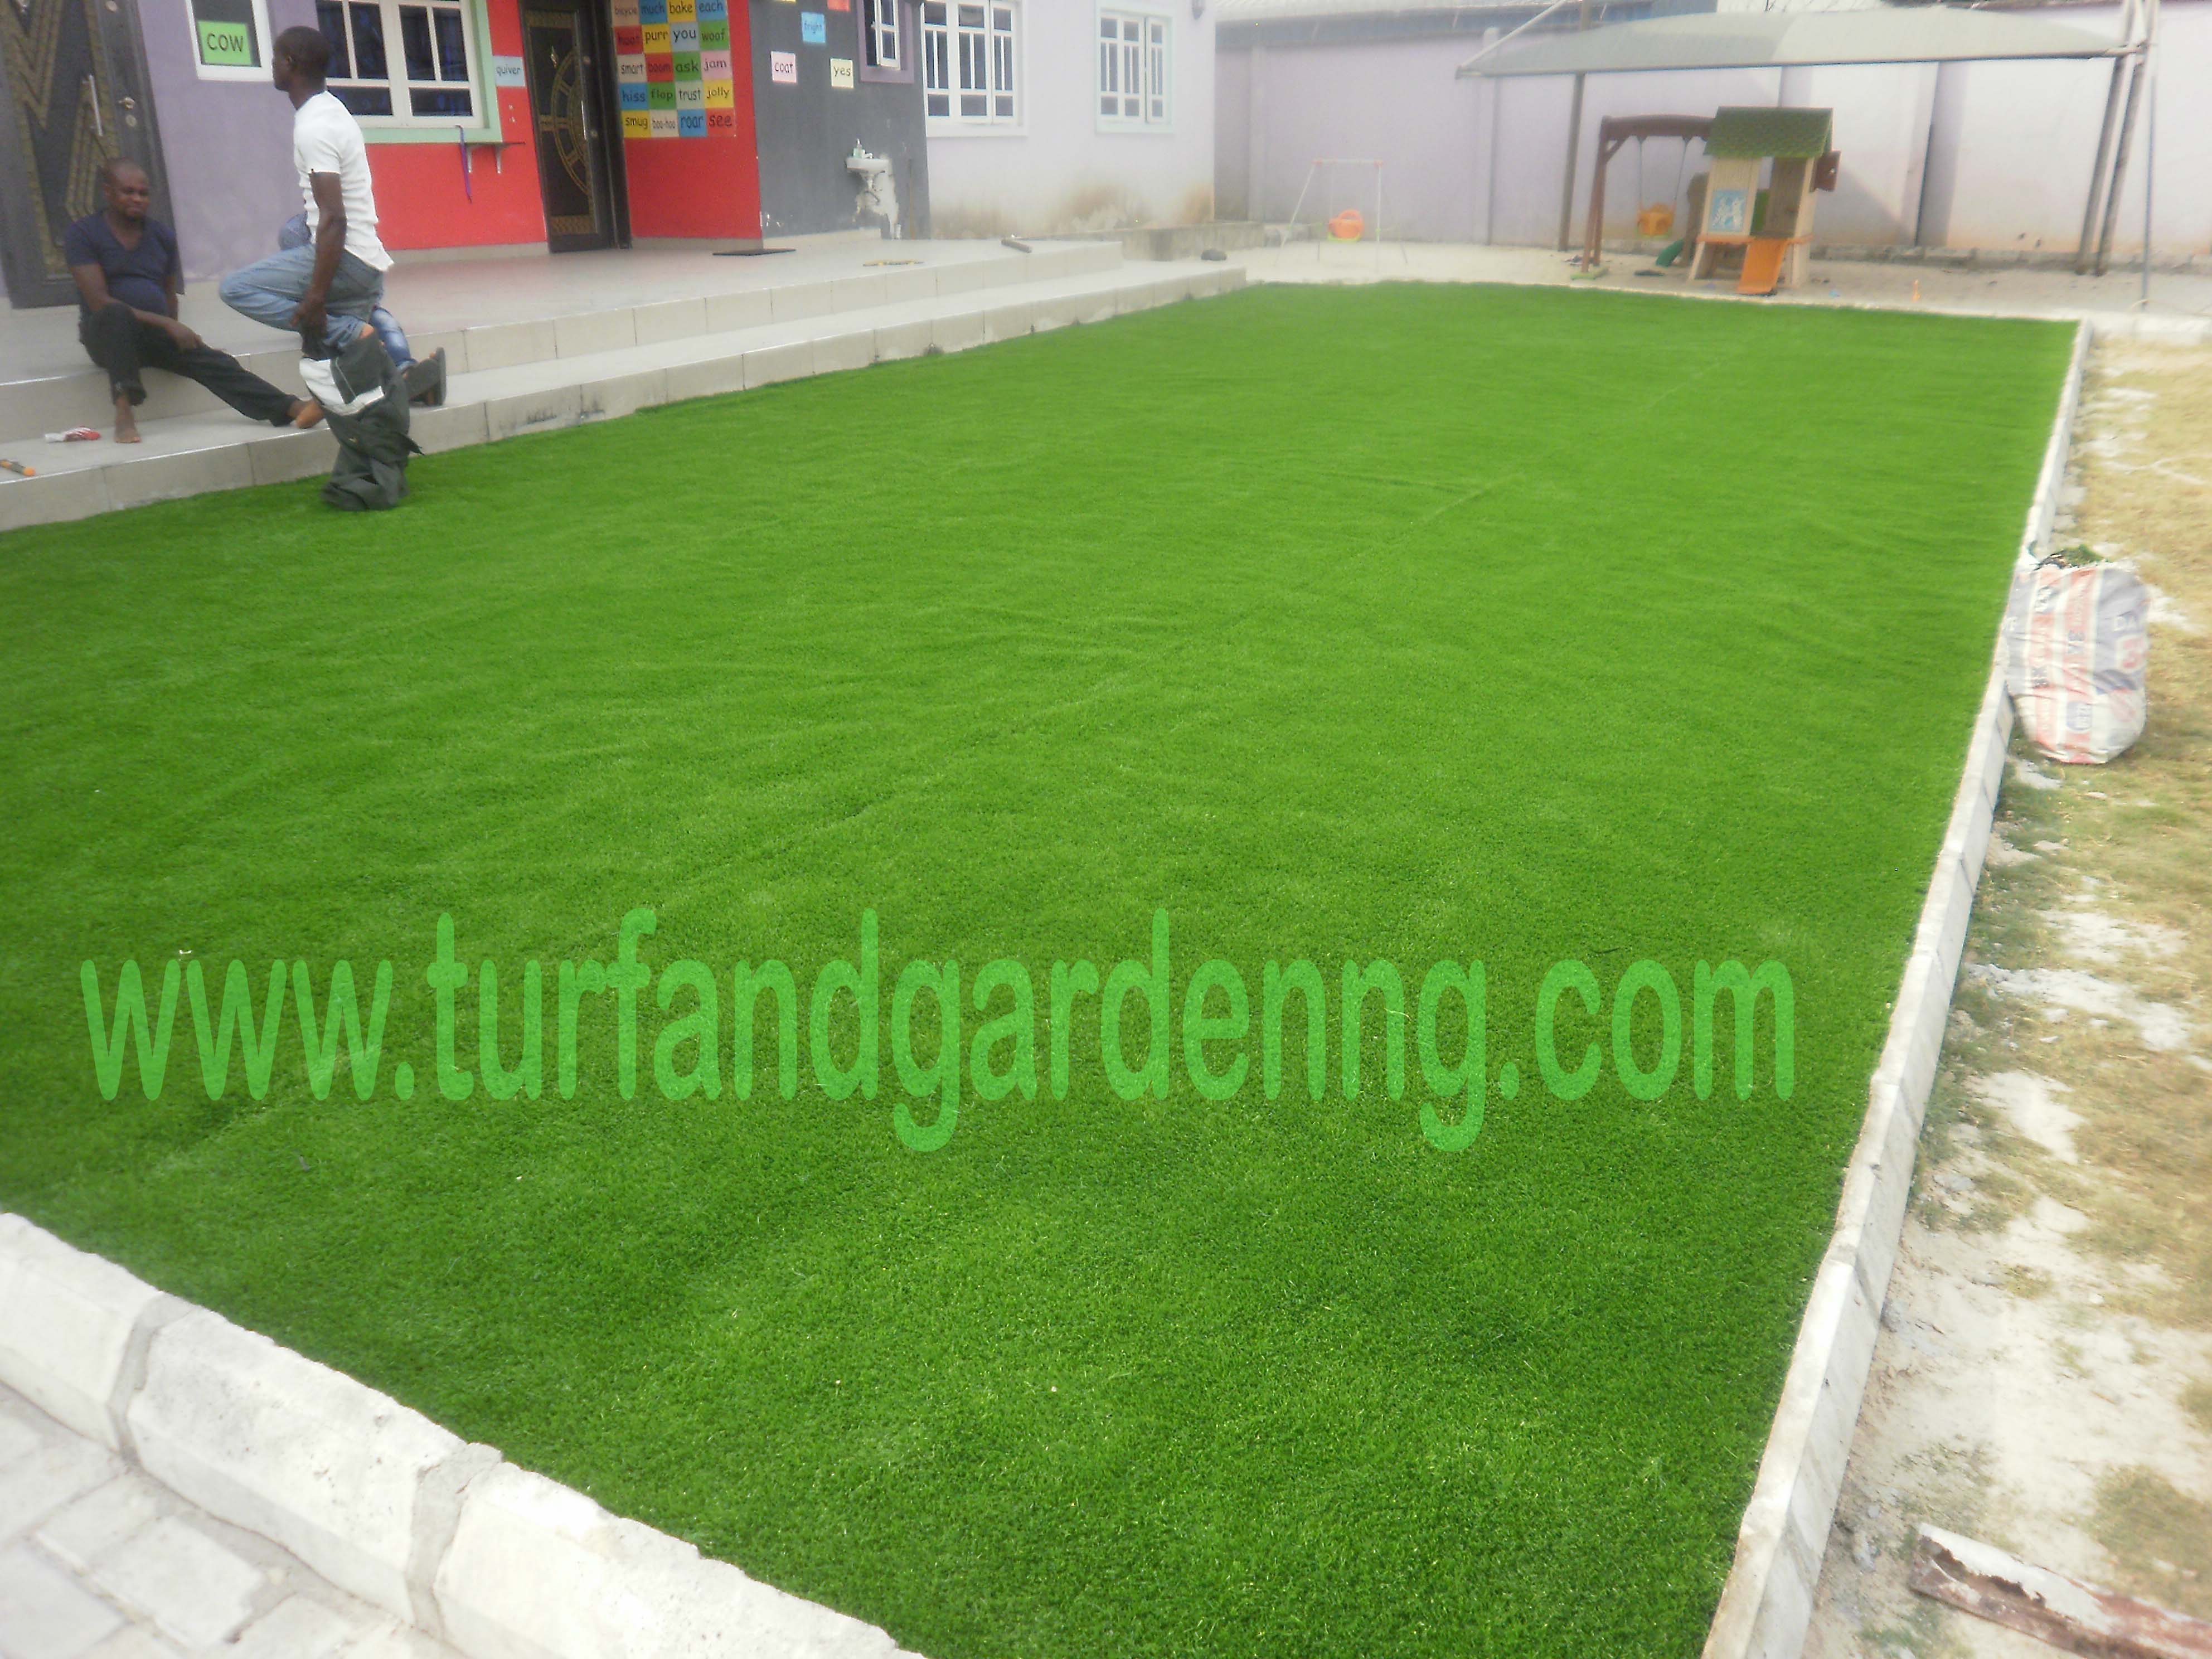 Play Academy Schools - Trans Amadi Gardens - Completed view